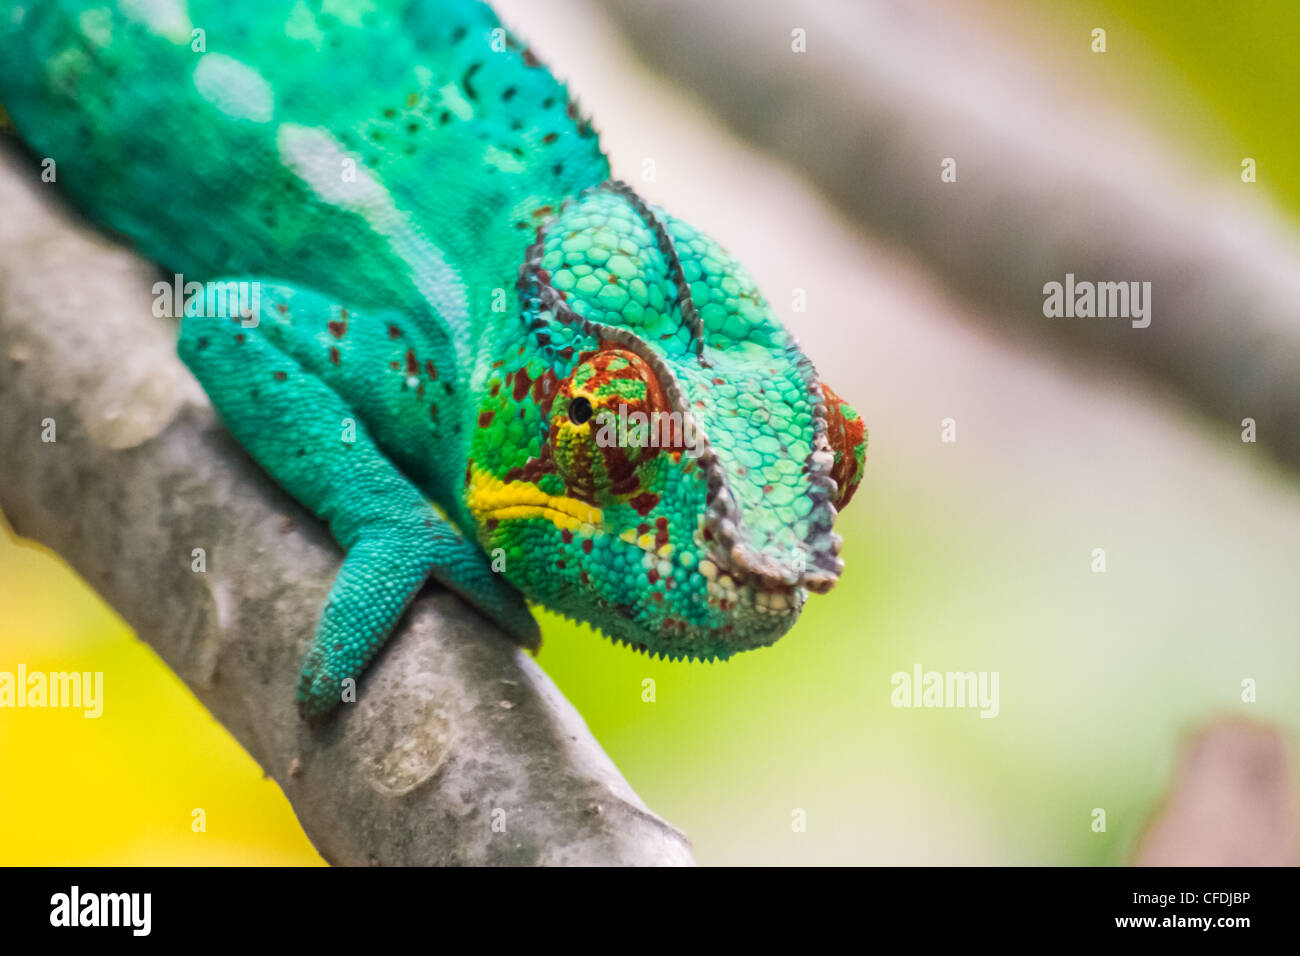 Panther chameleon, endemic reptile of Madagascar Stock Photo